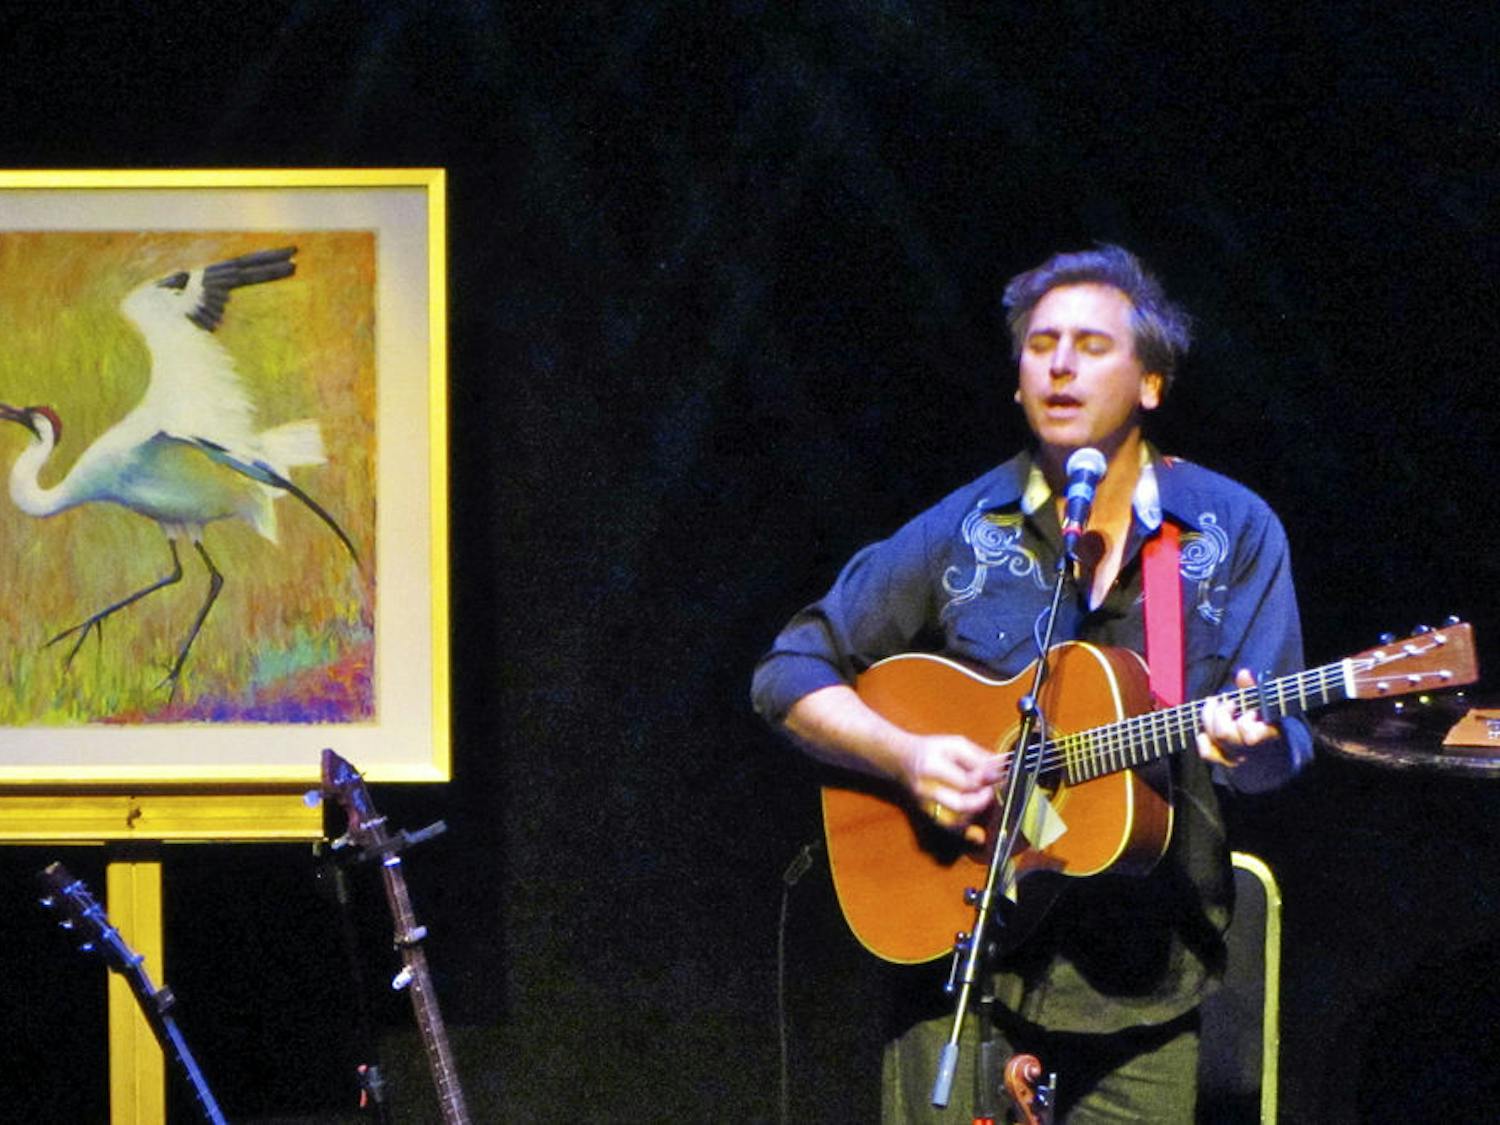 Joe Crookston, an American artist, writer and folk singer, performs at the Squitieri Studio Theatre in the west wing of the Phillips Center for the Performing Arts Thursday night."